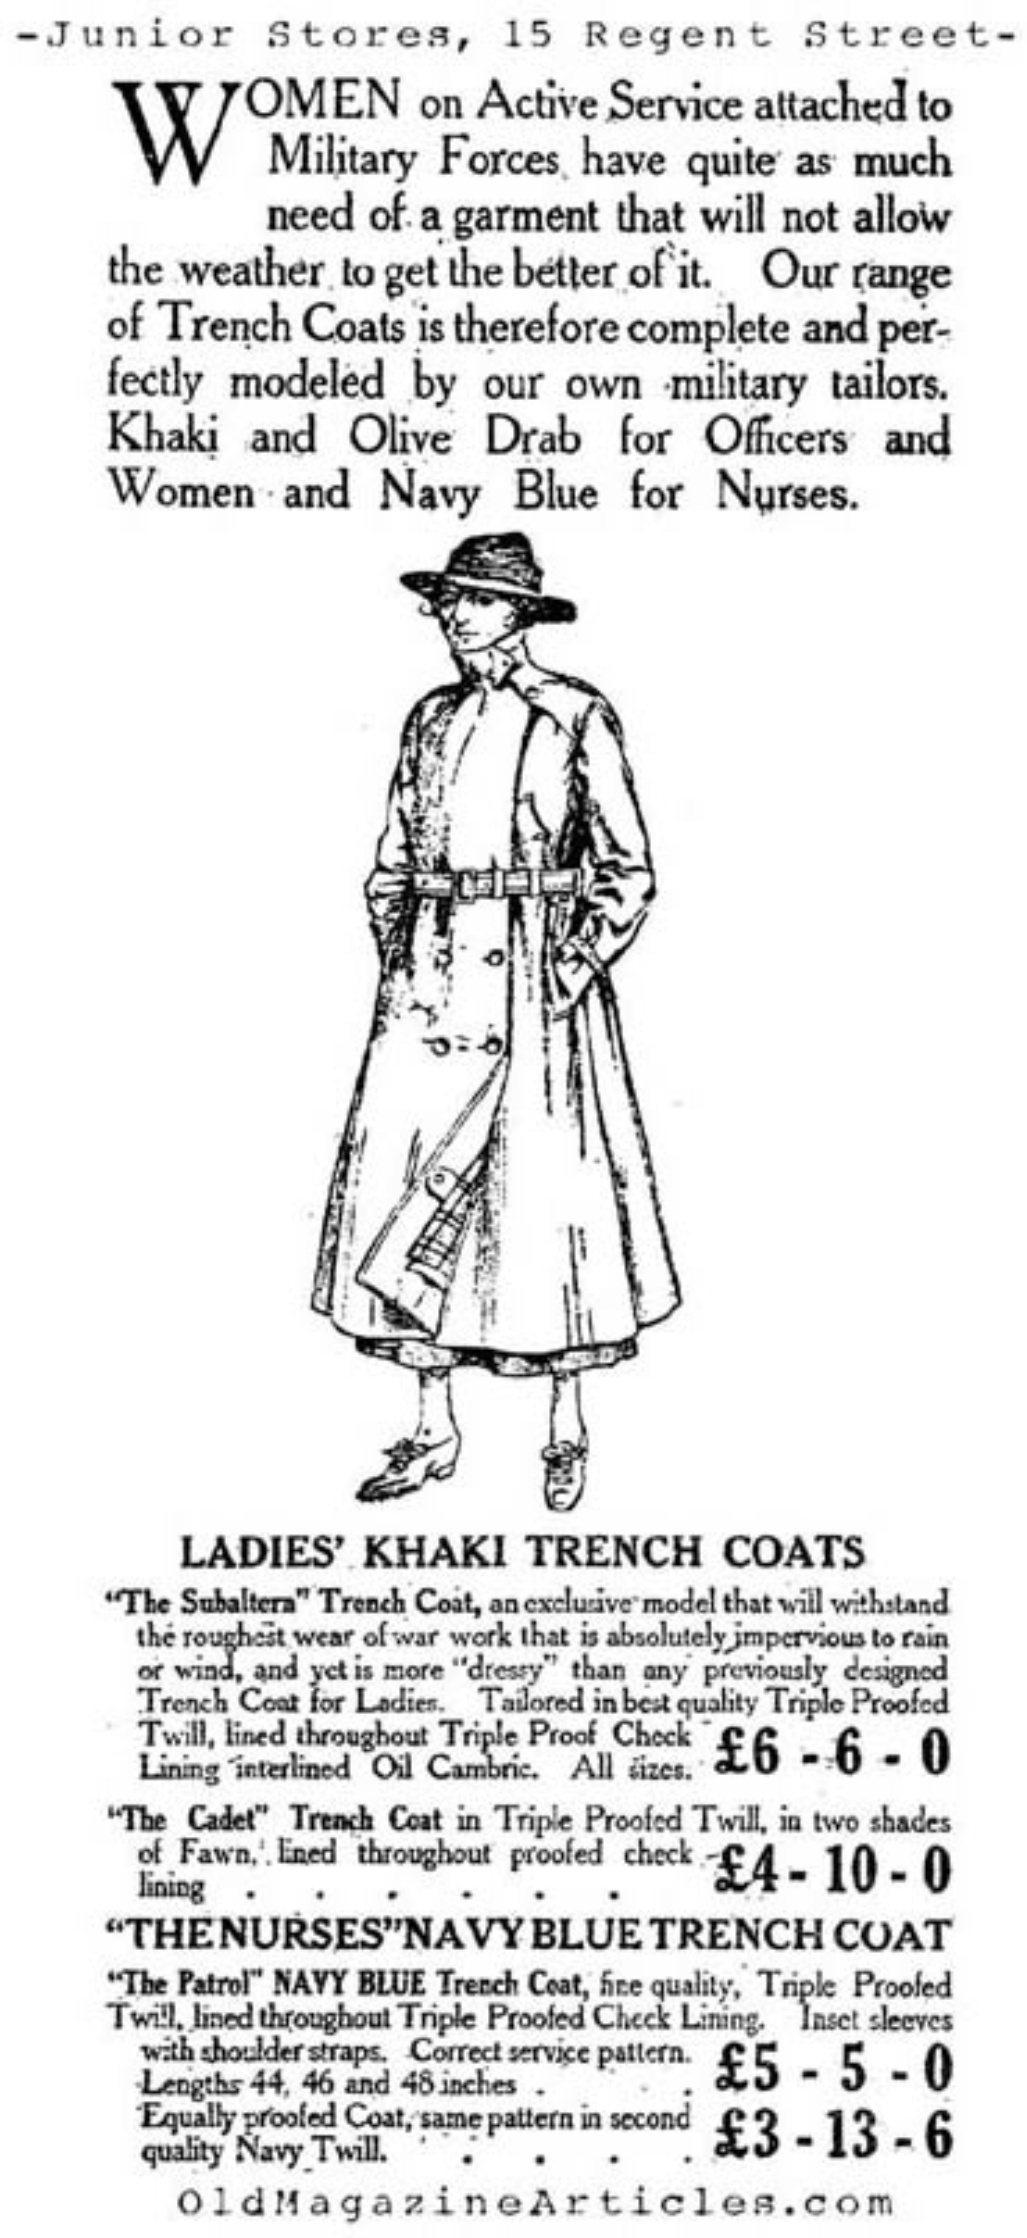 Trench Coats for Women  (The Stars and Stripes, 1918)